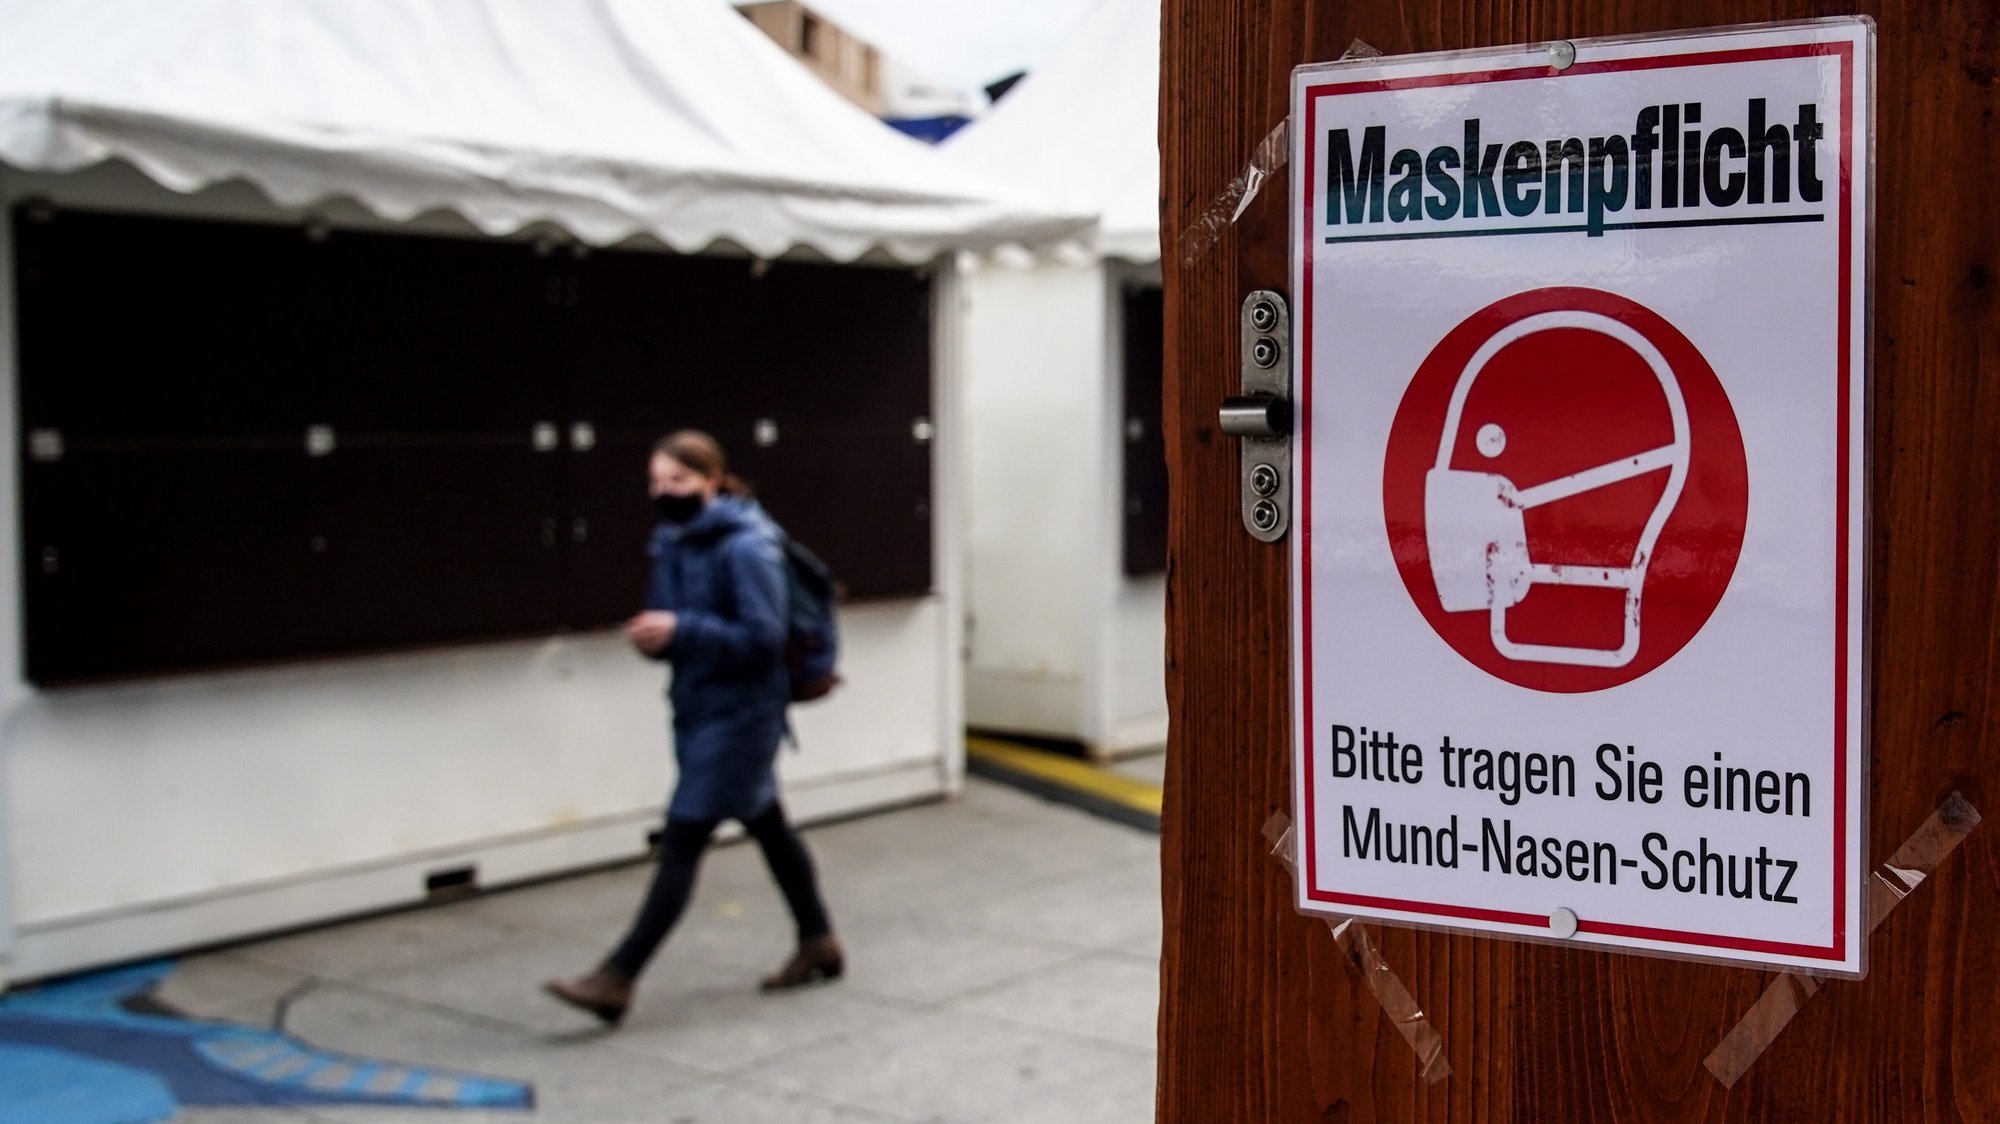 epa08824094 A woman walks next to a sign informing customers to wear face masks as she passes by a closed Christmas Market stall at Potsdamer Platz in Berlin, Germany, 16 November 2020. Effective from 02 November, Germany is on nationwide restrictions to prevent a further explosion in the number of corona infections, such as closing bars and restaurants for a month.  EPA/FILIP SINGER